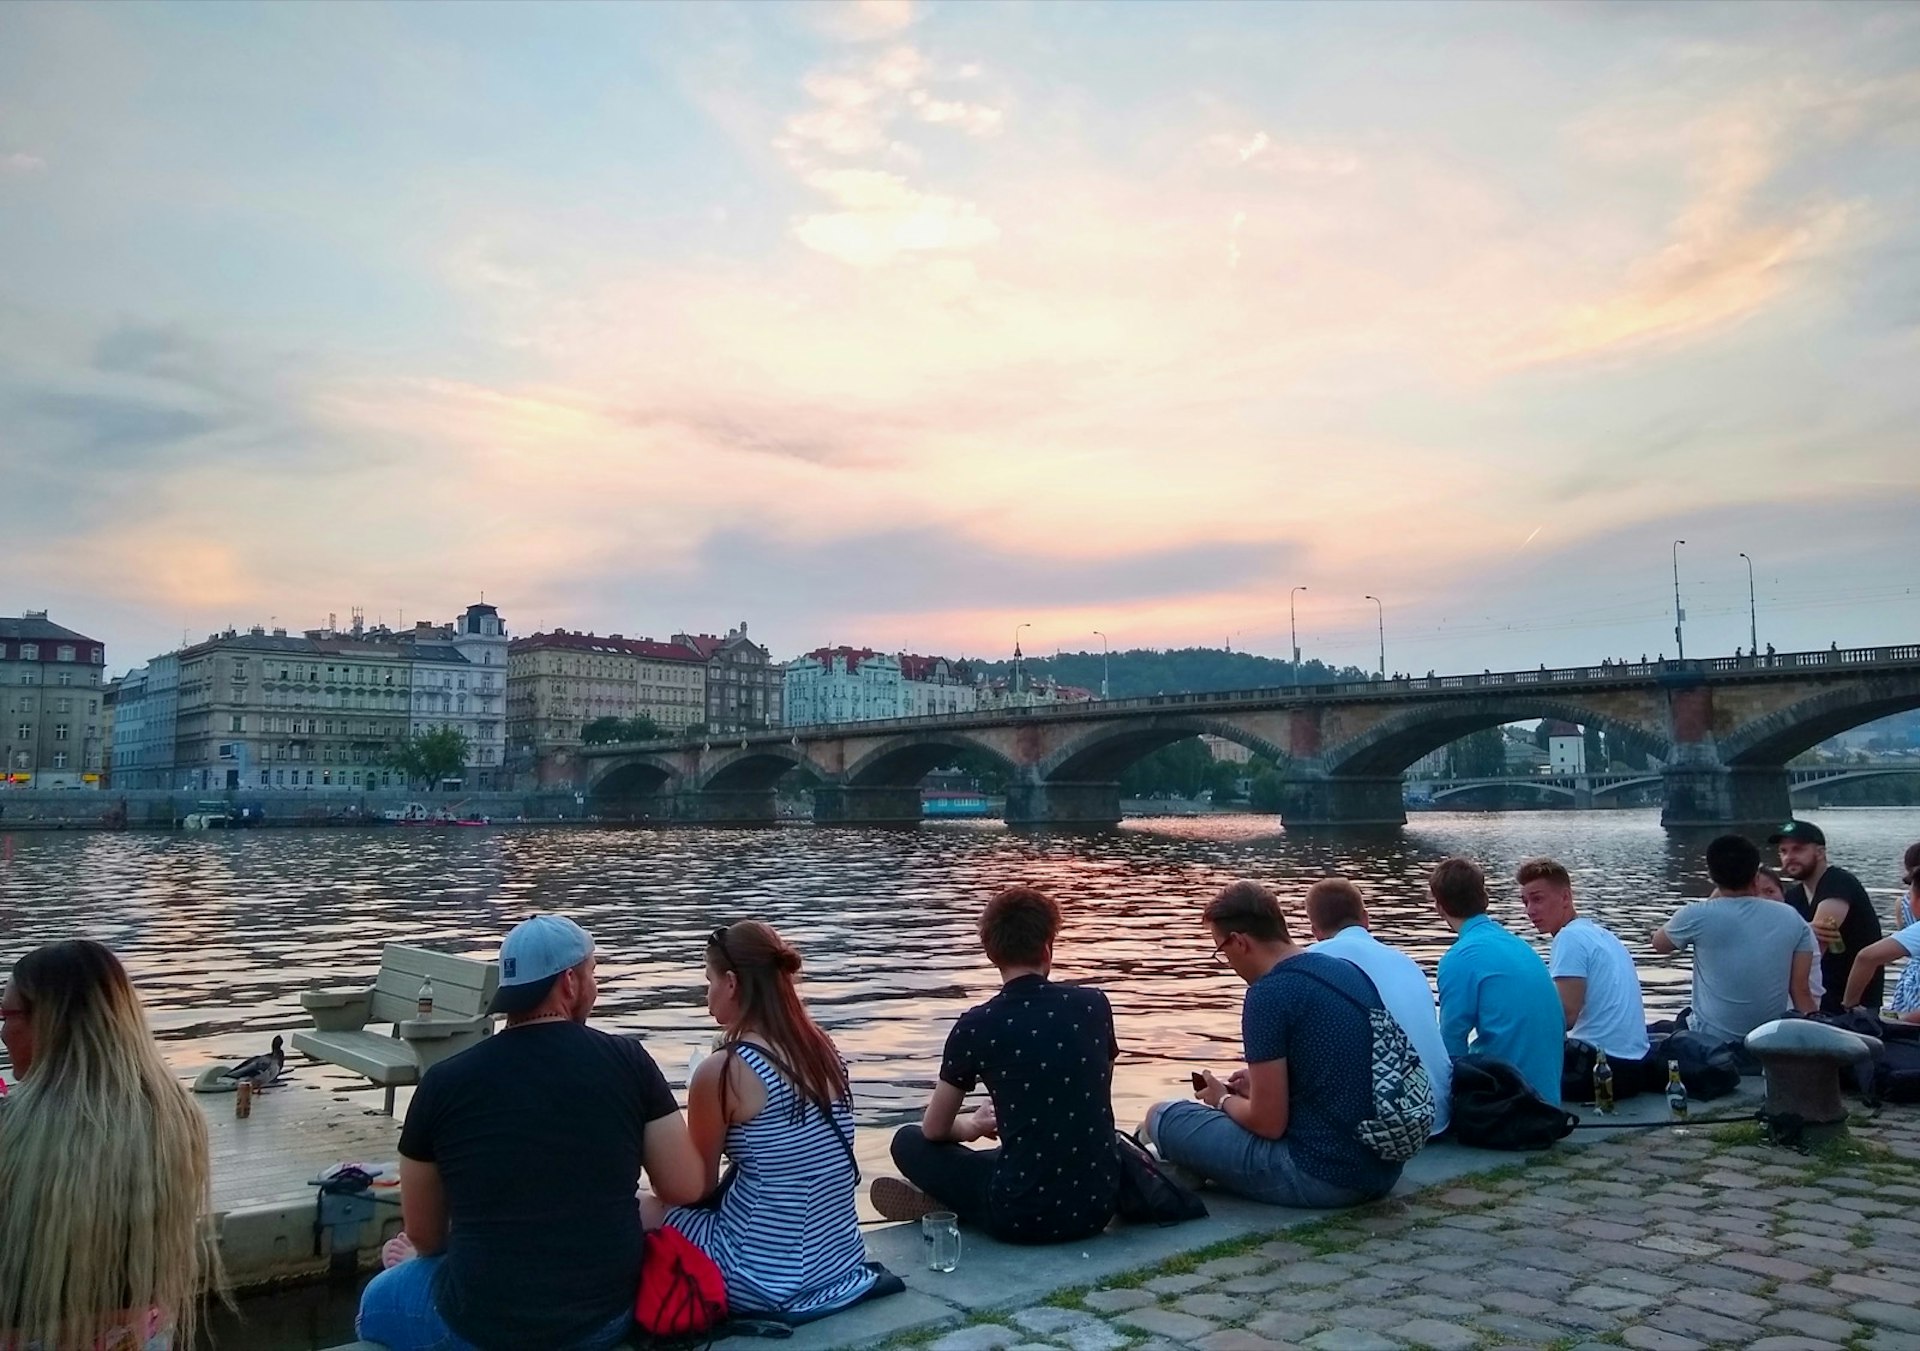 A row of young people sit on the concrete riverbank, looking at an old-world bridge across the river in Prague